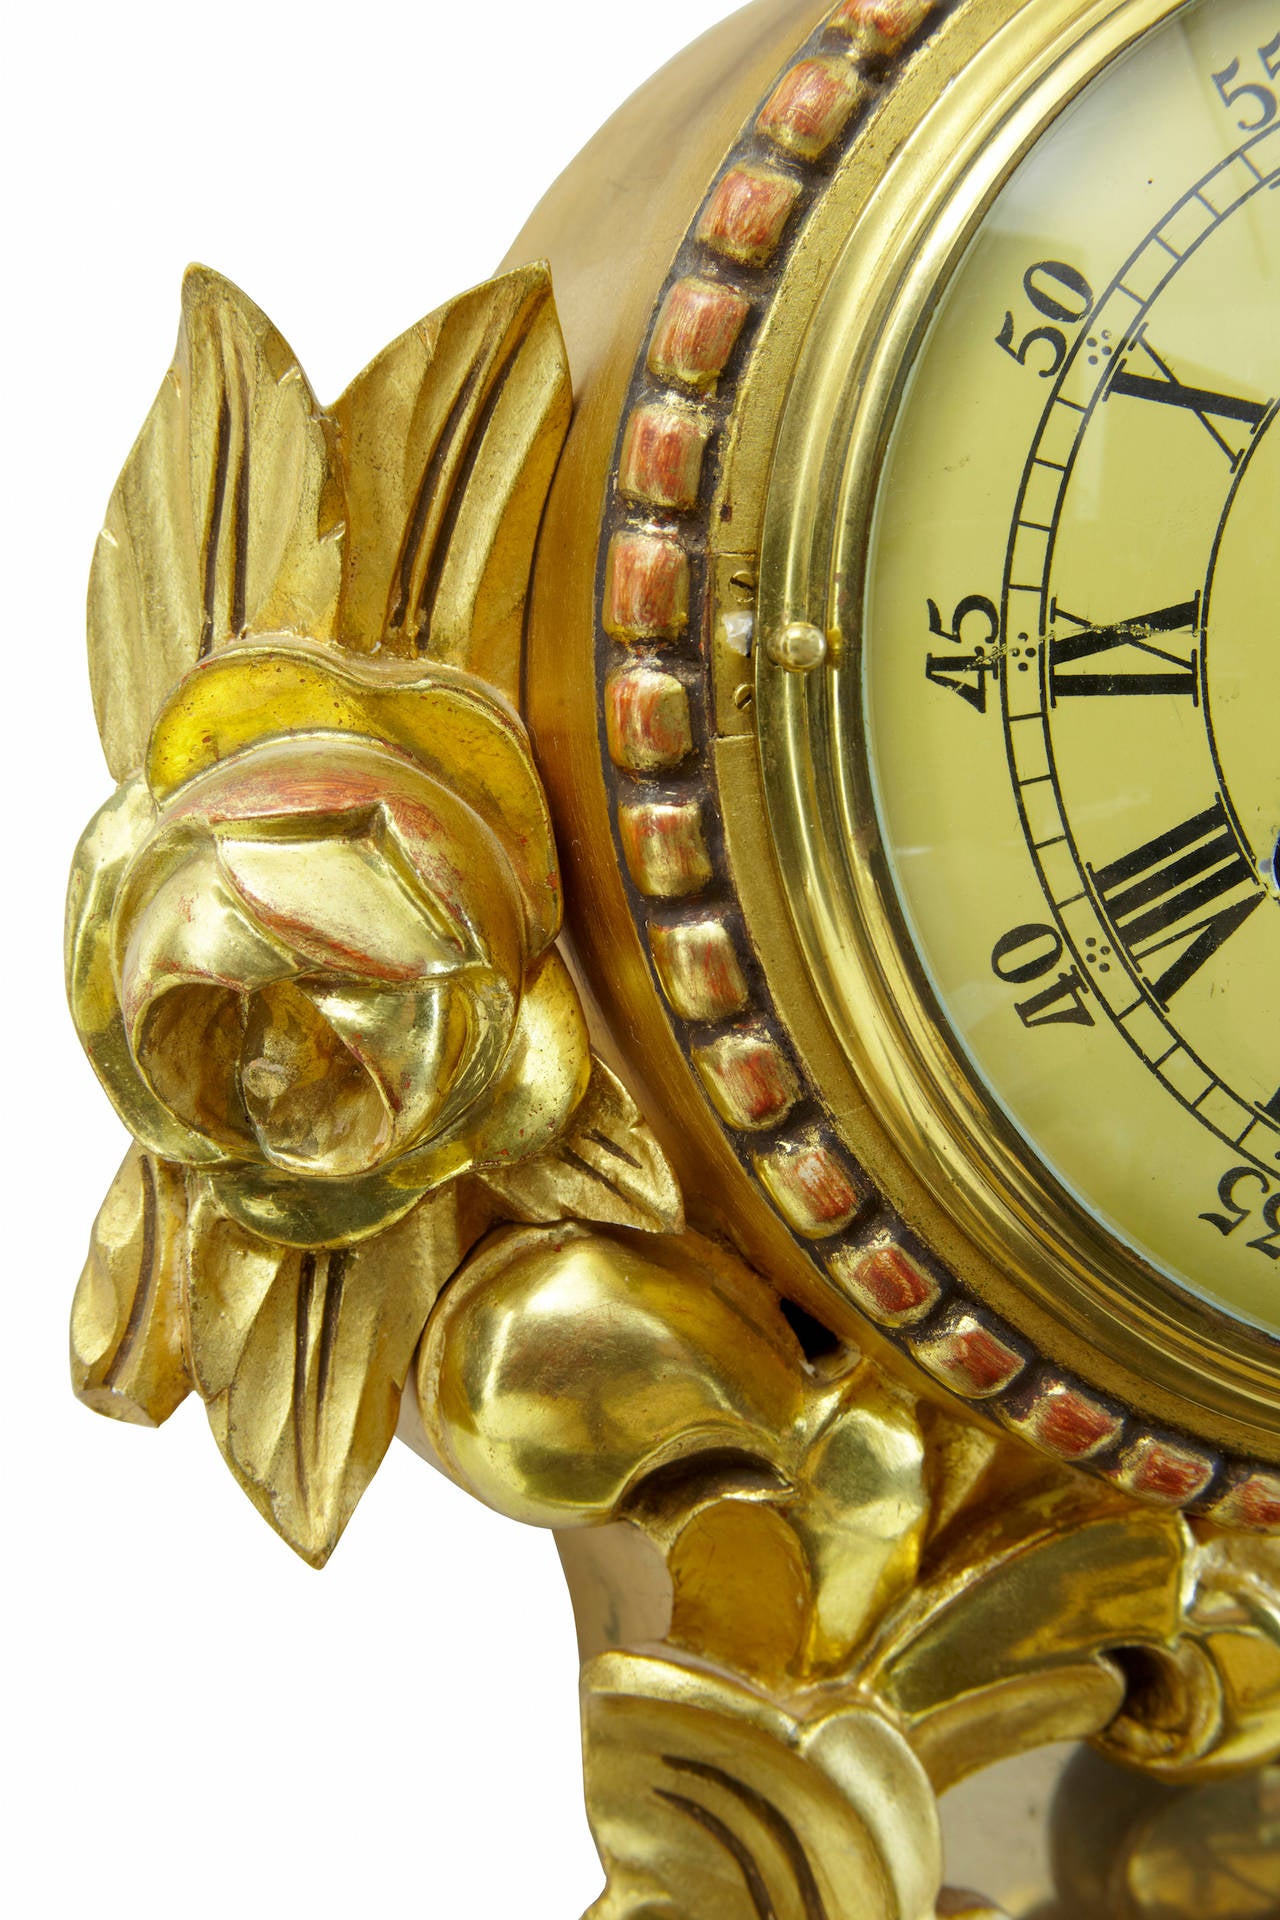 Fine quality Swedish gilt clock circa 1947.
Good quality carved wood clock, with roman numerals on the enamel dial.
Westerstrand stamped pendulum movement.
We recommend that the clock receives a professional service.

HEIGHT: 20 3/4